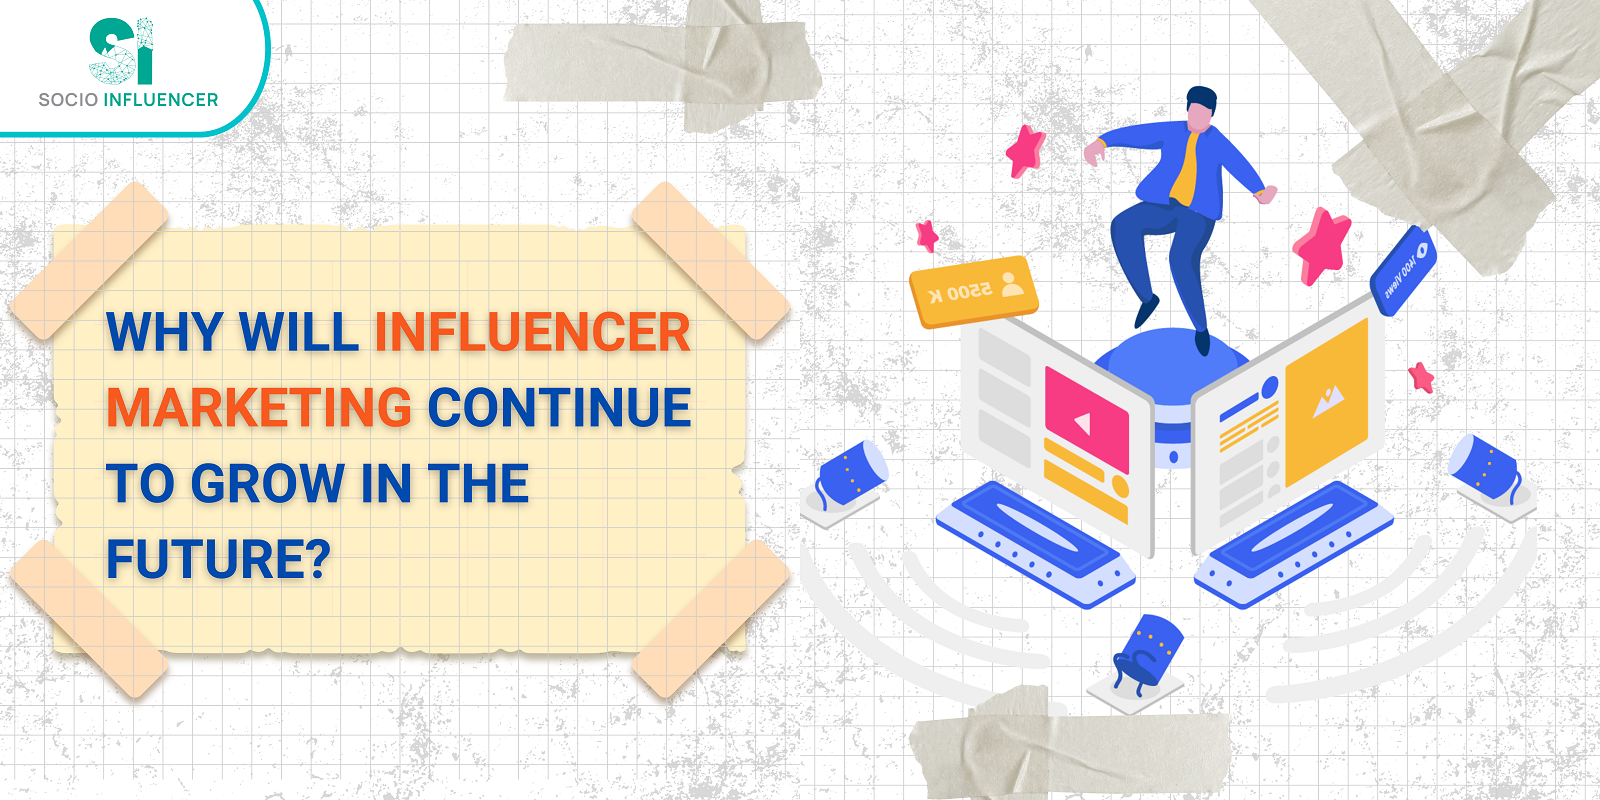 How Will Influencer Marketing Grow in the Future | Socio Influencer